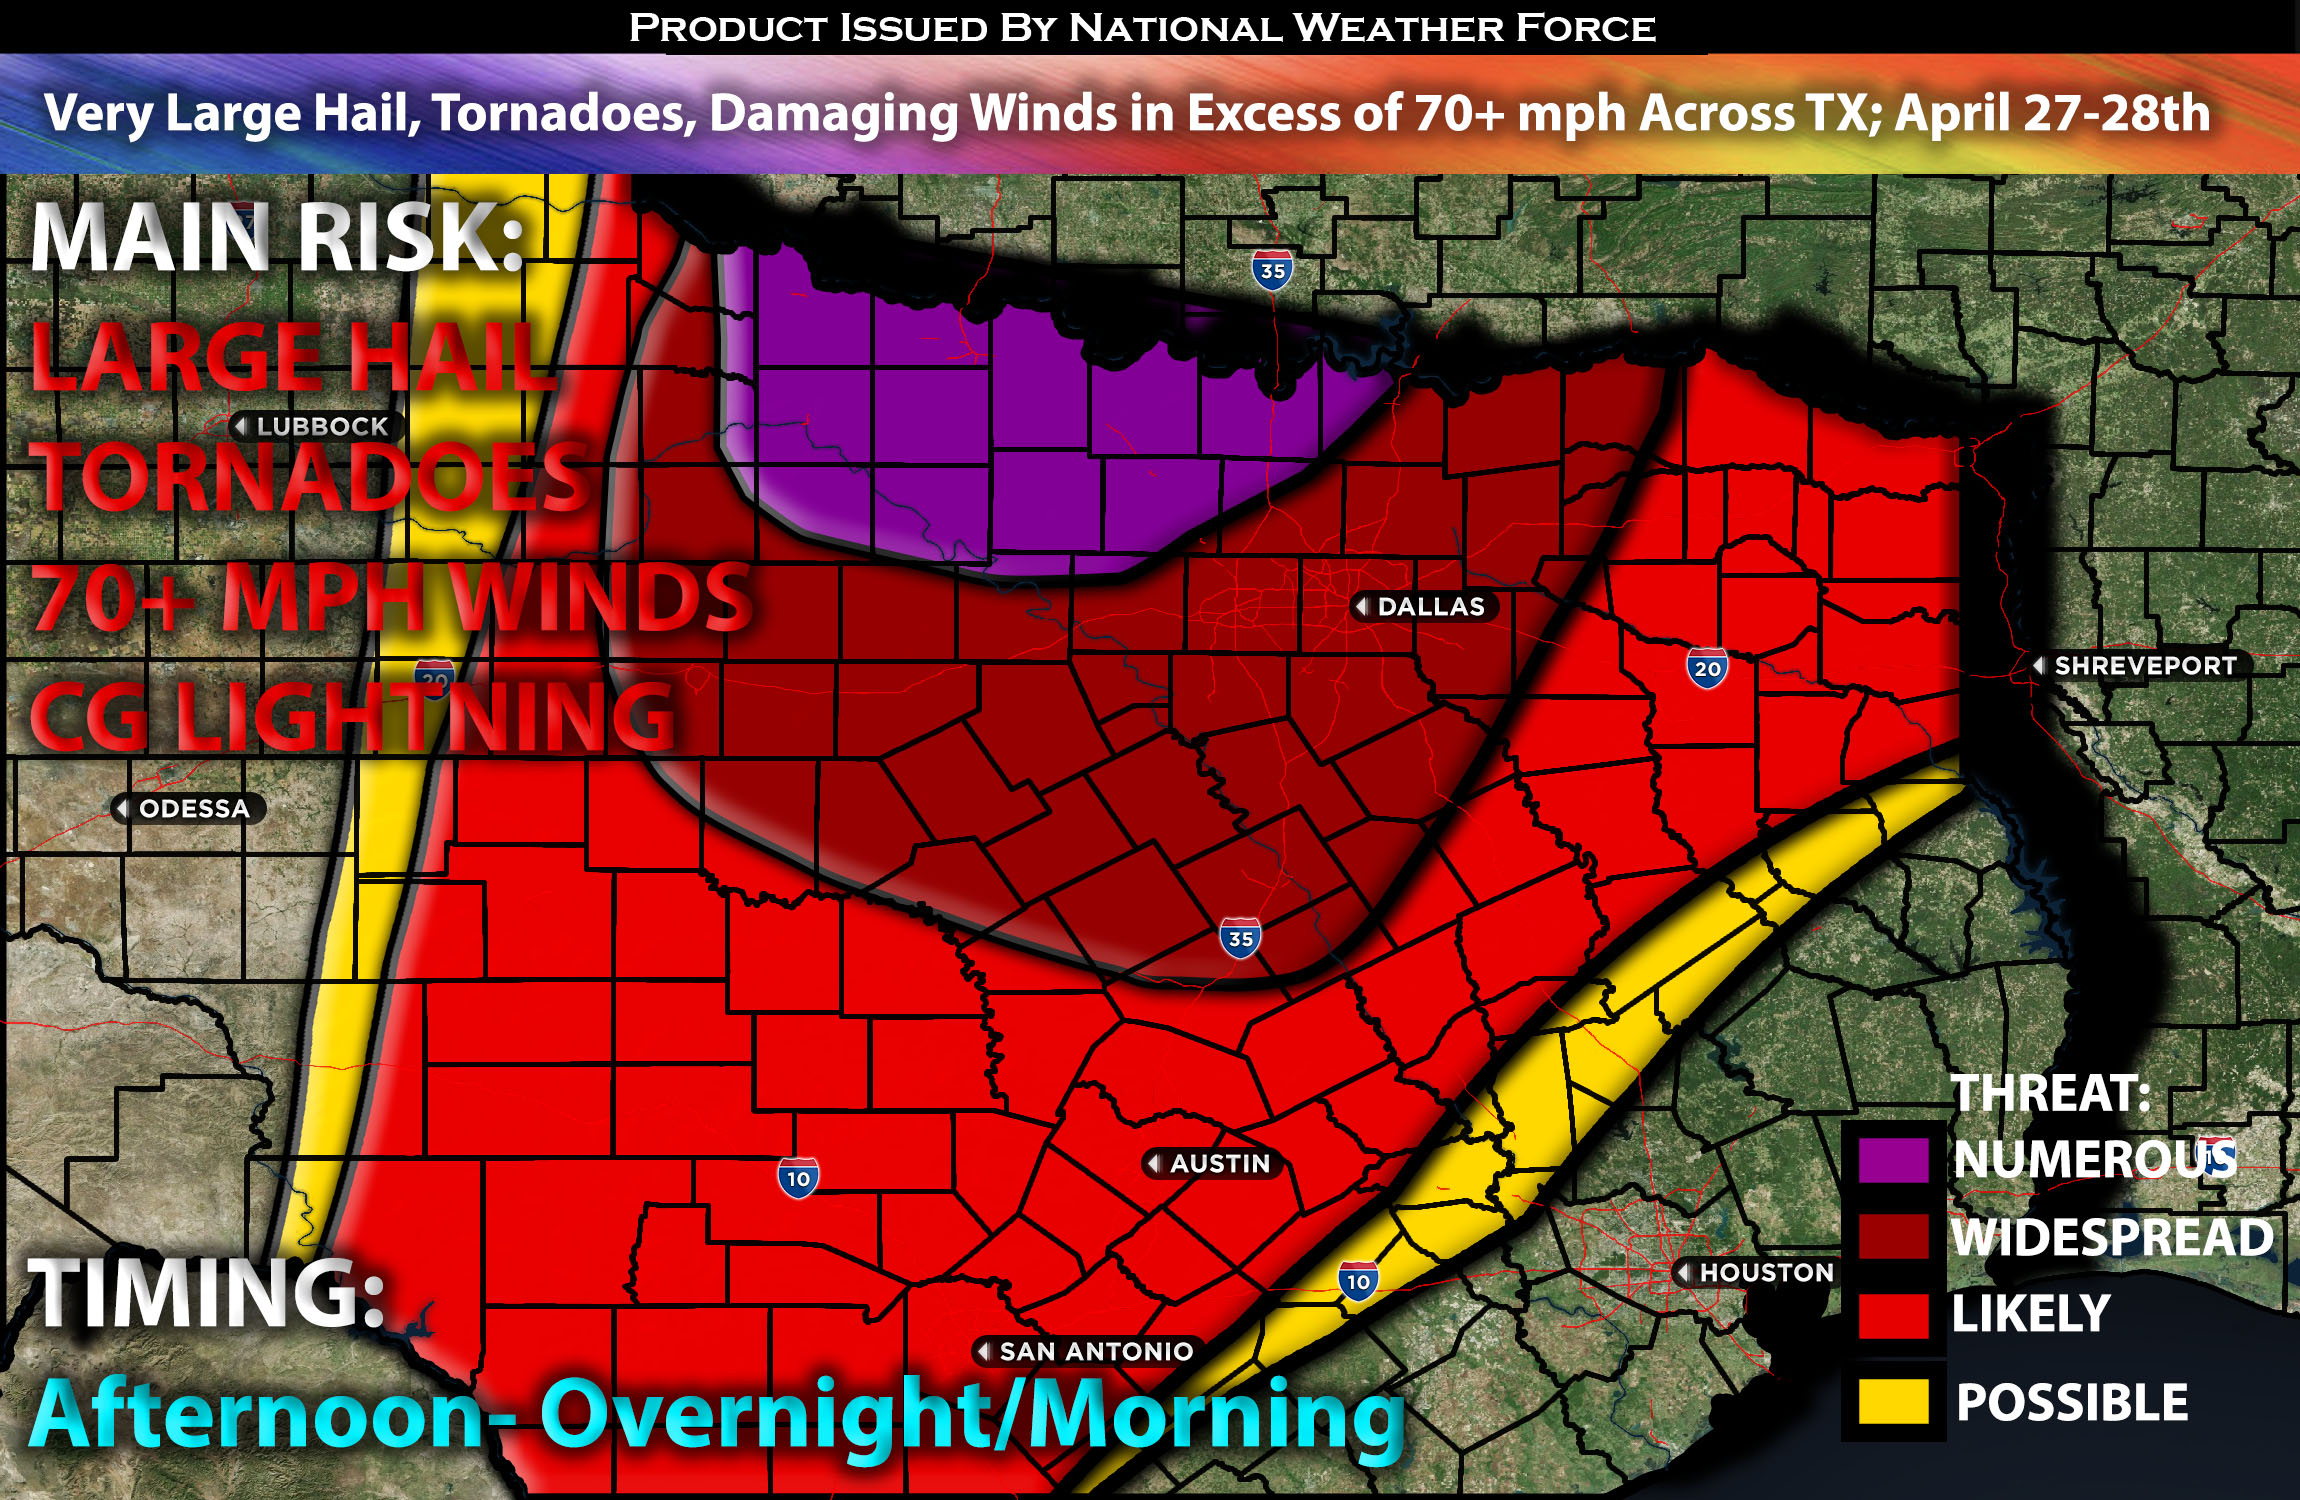 Very Large Hail, Tornadoes, Damaging Winds in Excess of 70+ mph Across Northern TX; April 27-28th